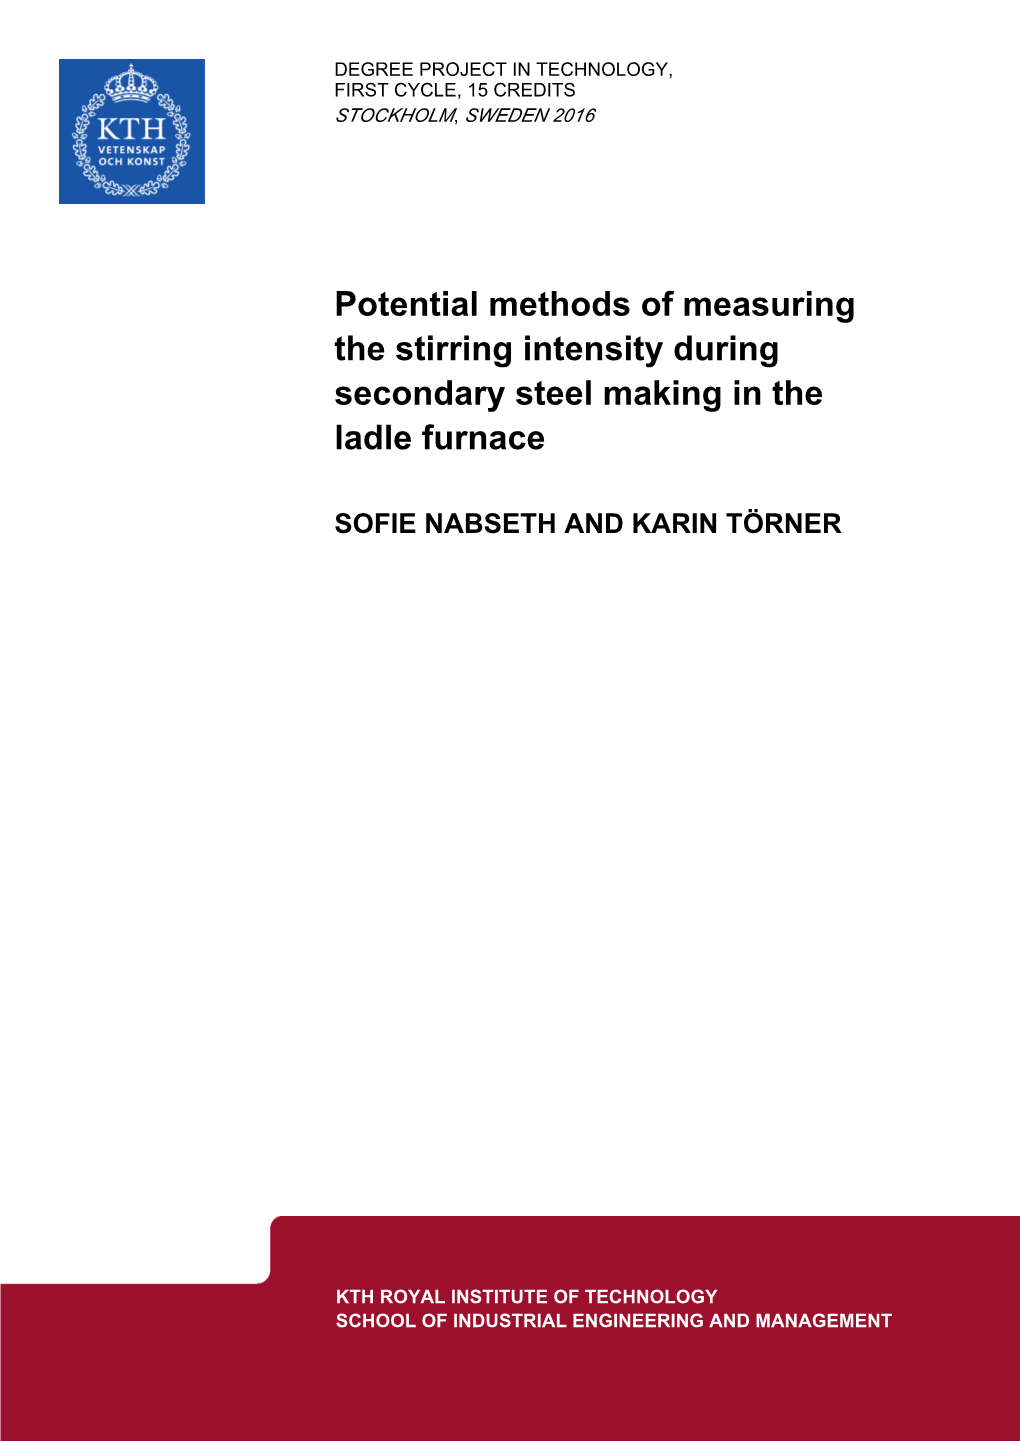 Potential Methods of Measuring the Stirring Intensity During Secondary Steel Making in the Ladle Furnace